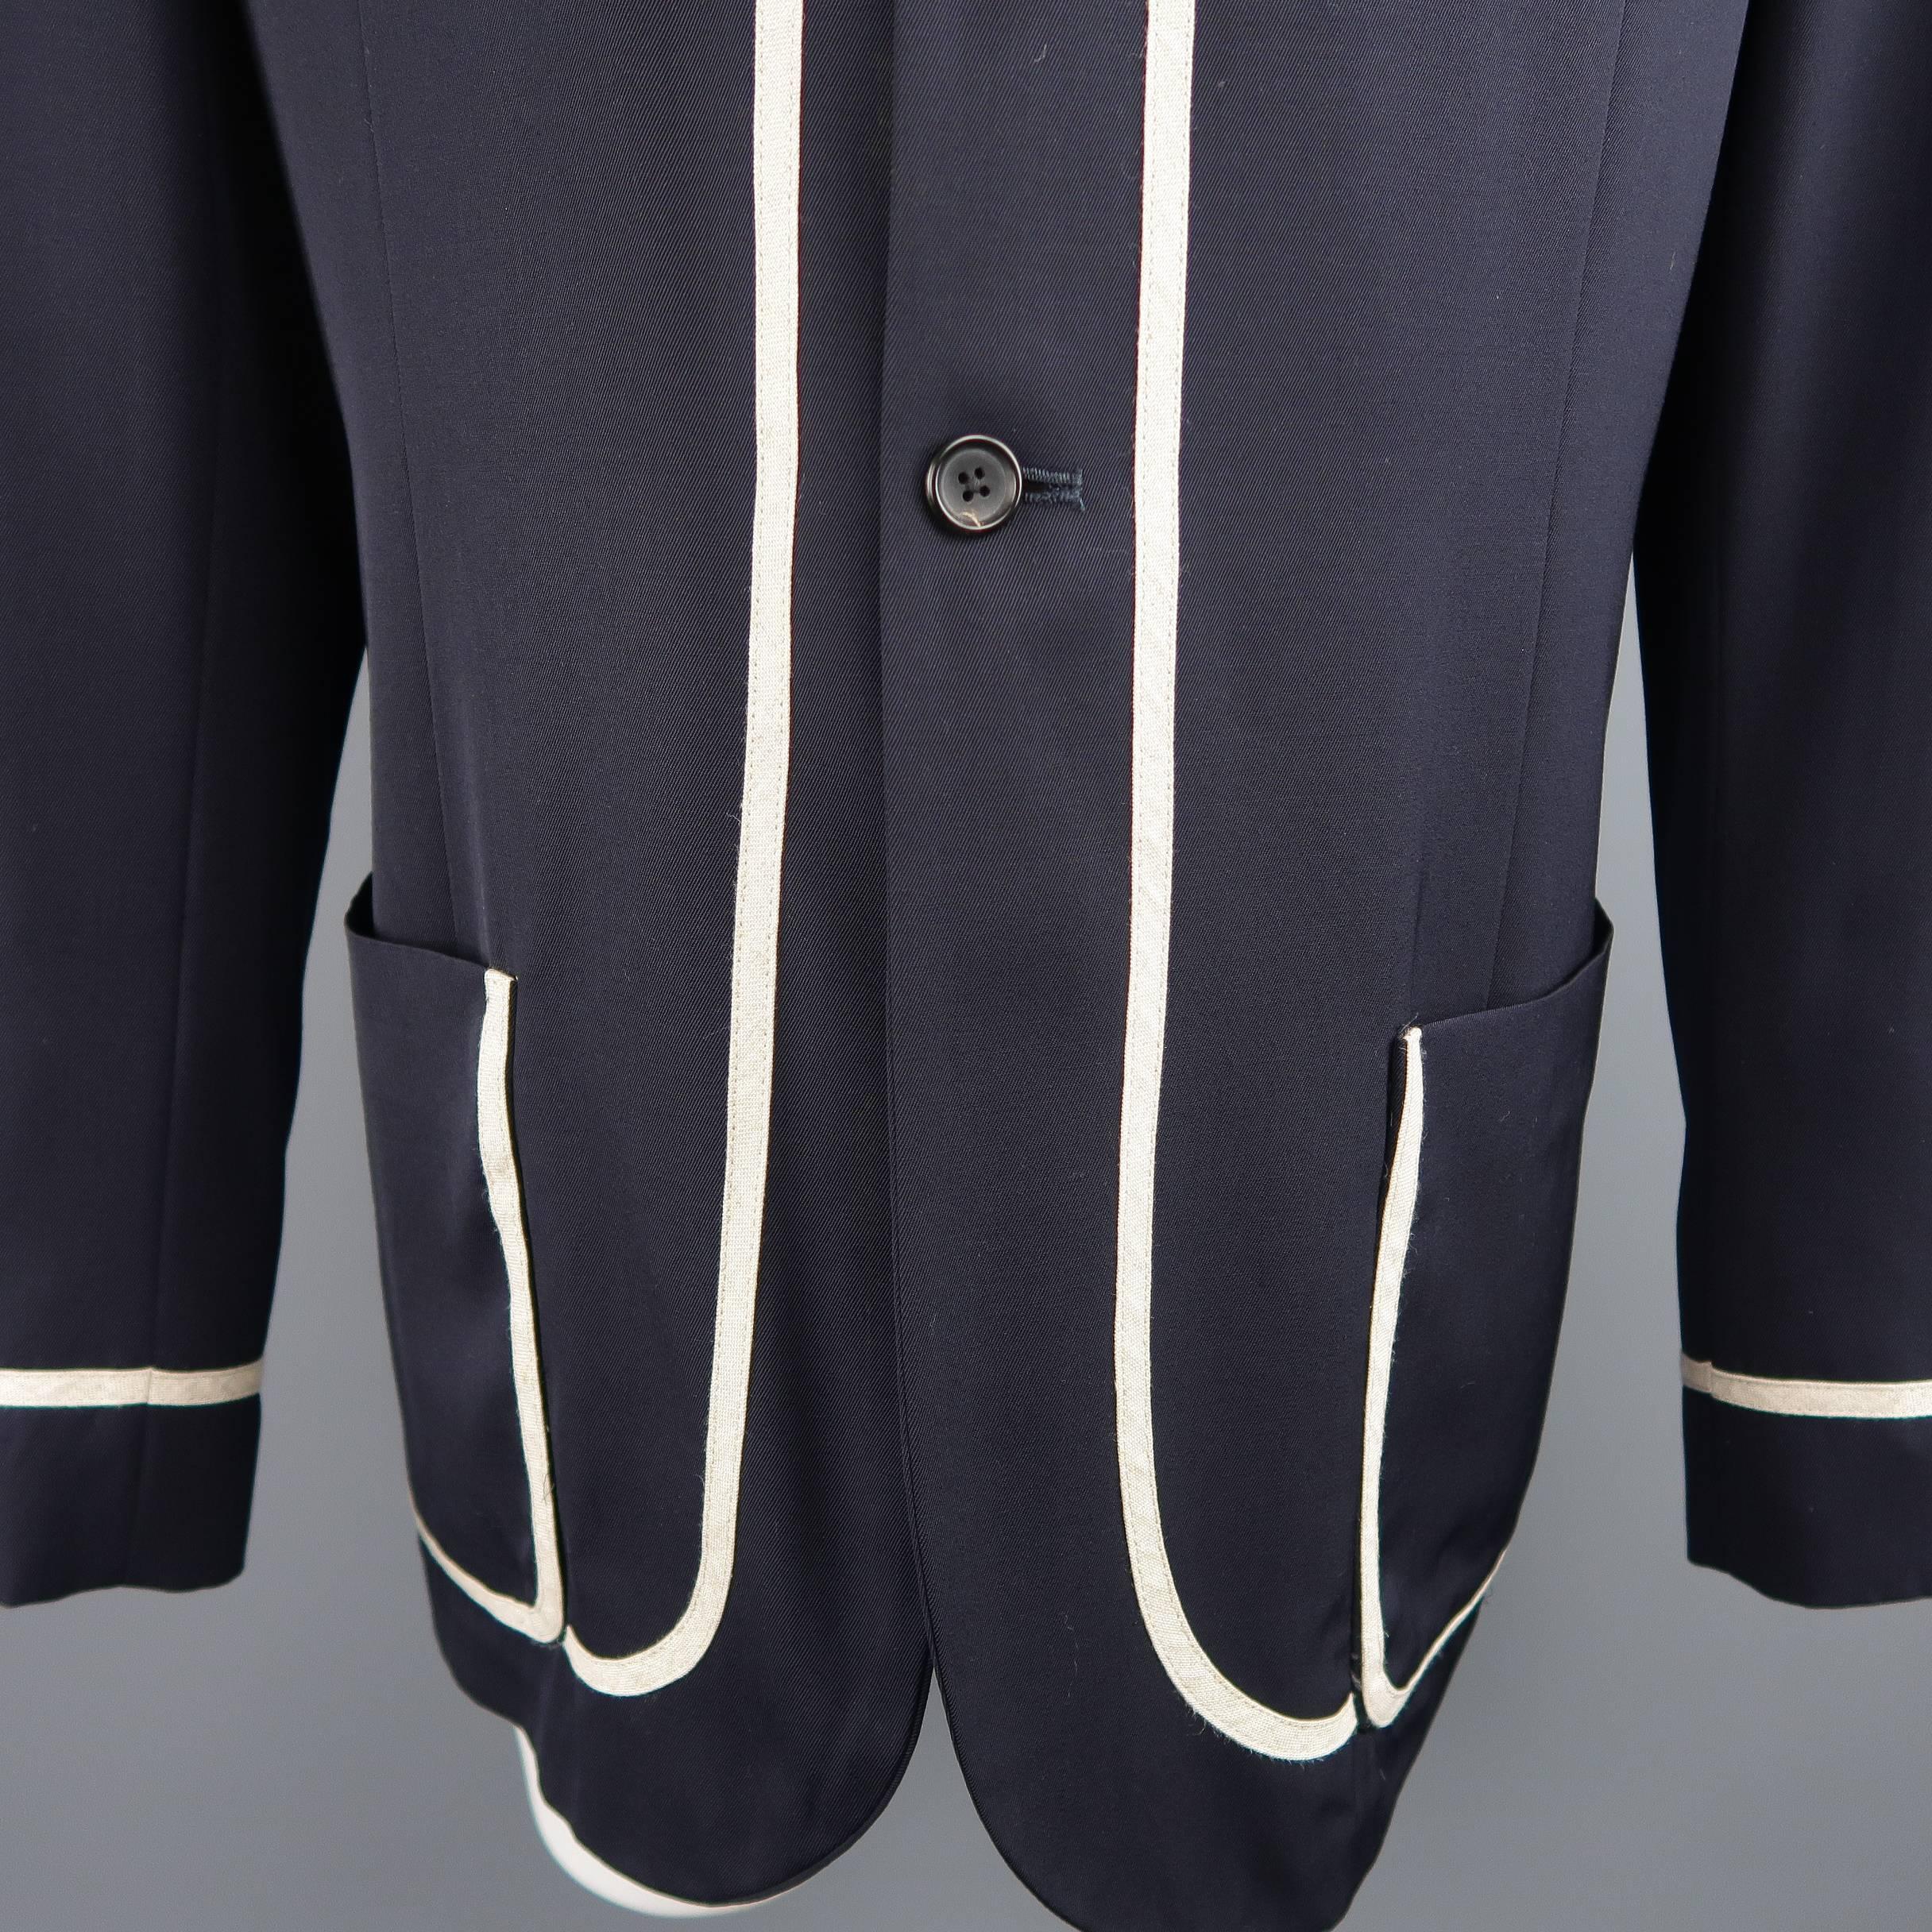 Archive Yohyi Yamamoto pour Homme oversized sport coat comes in light weight navy wool twill and features a notch lapel, three button front, patch pockets, and thick beige piping throughout. Made in Japan.
 
Good Pre-Owned Condition.
Marked: M
